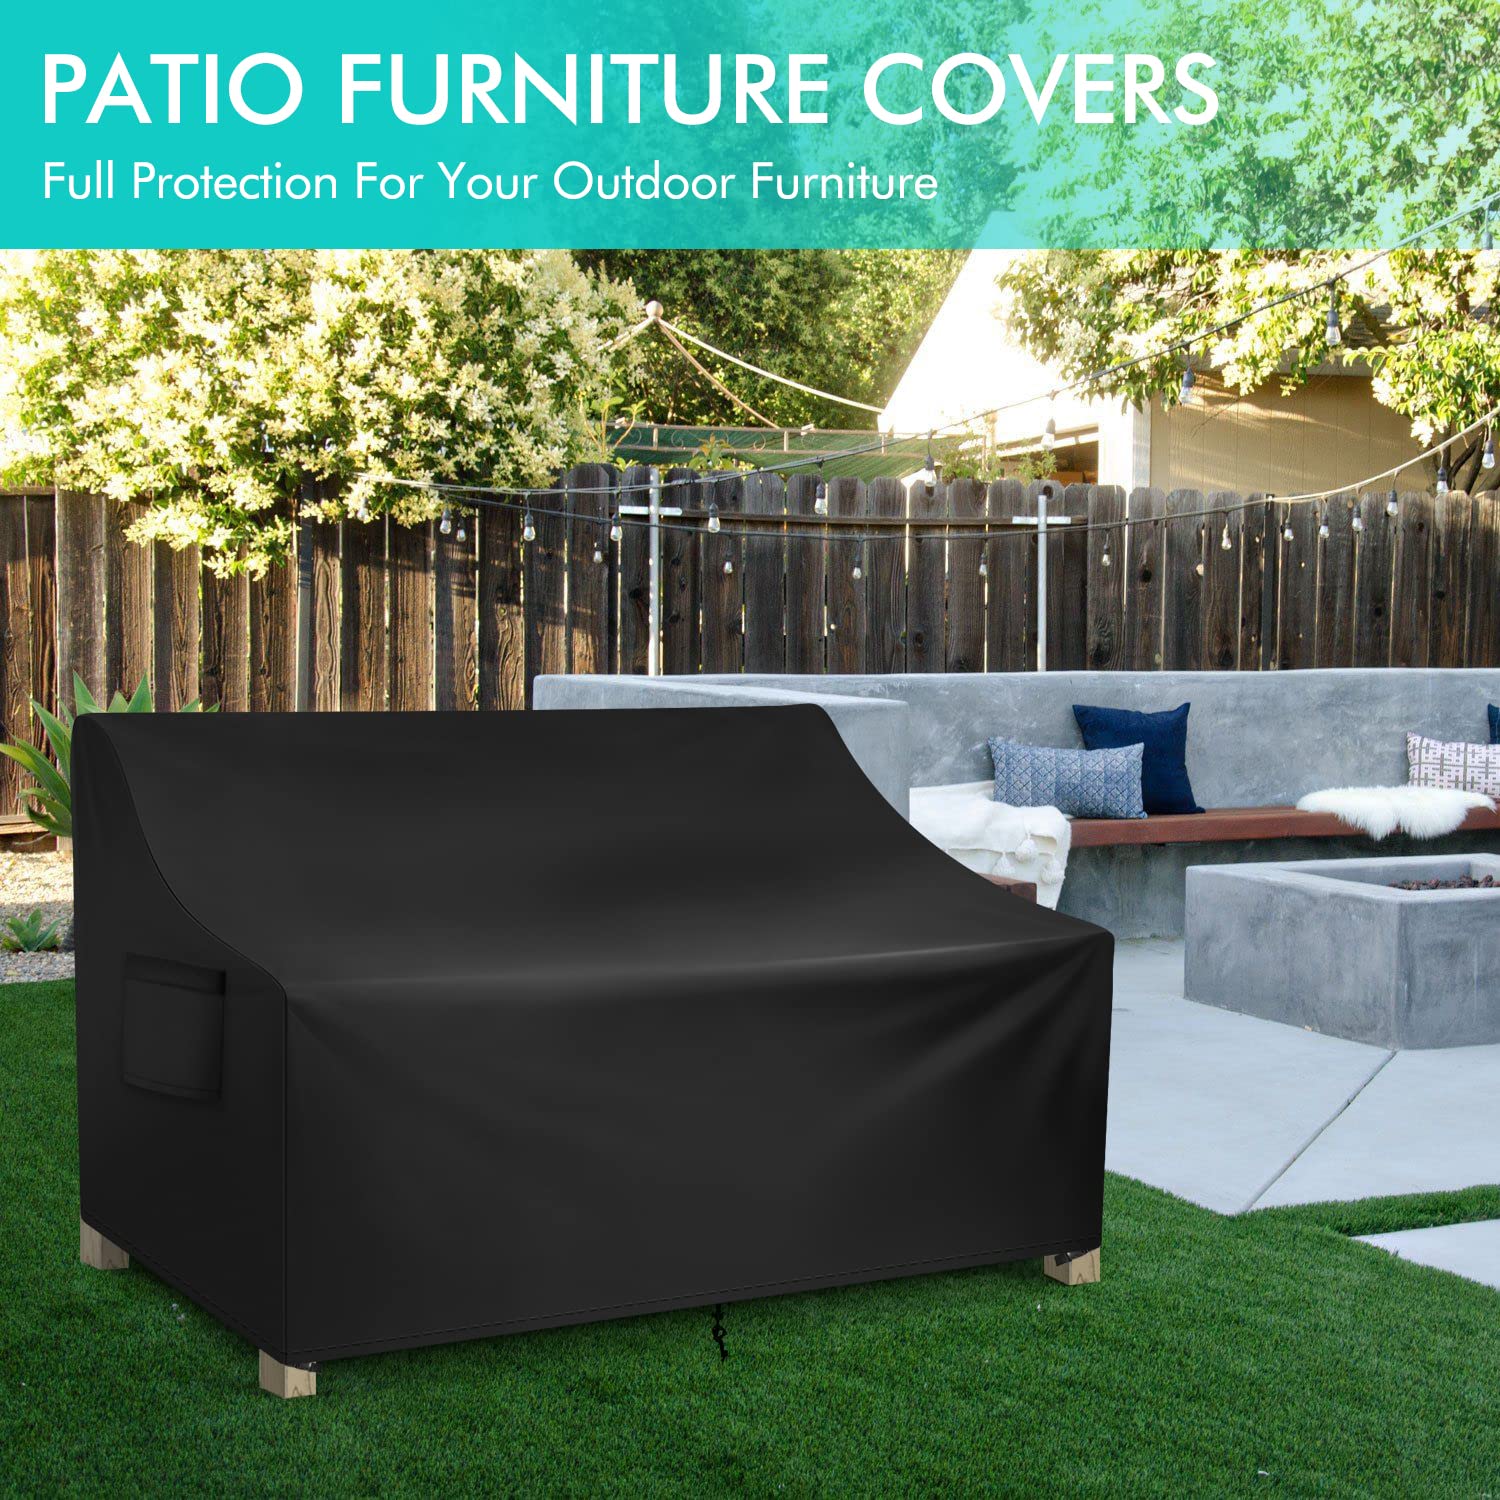 WLEAFJ Patio Sofa Cover Waterproof, Outdoor Loveseat Cover, Heavy Duty Deep Lounge Loveseat Cover, Large Lawn Patio Furniture Covers with Air Vent, 70’’ W x 38’’ D x 31’’ H